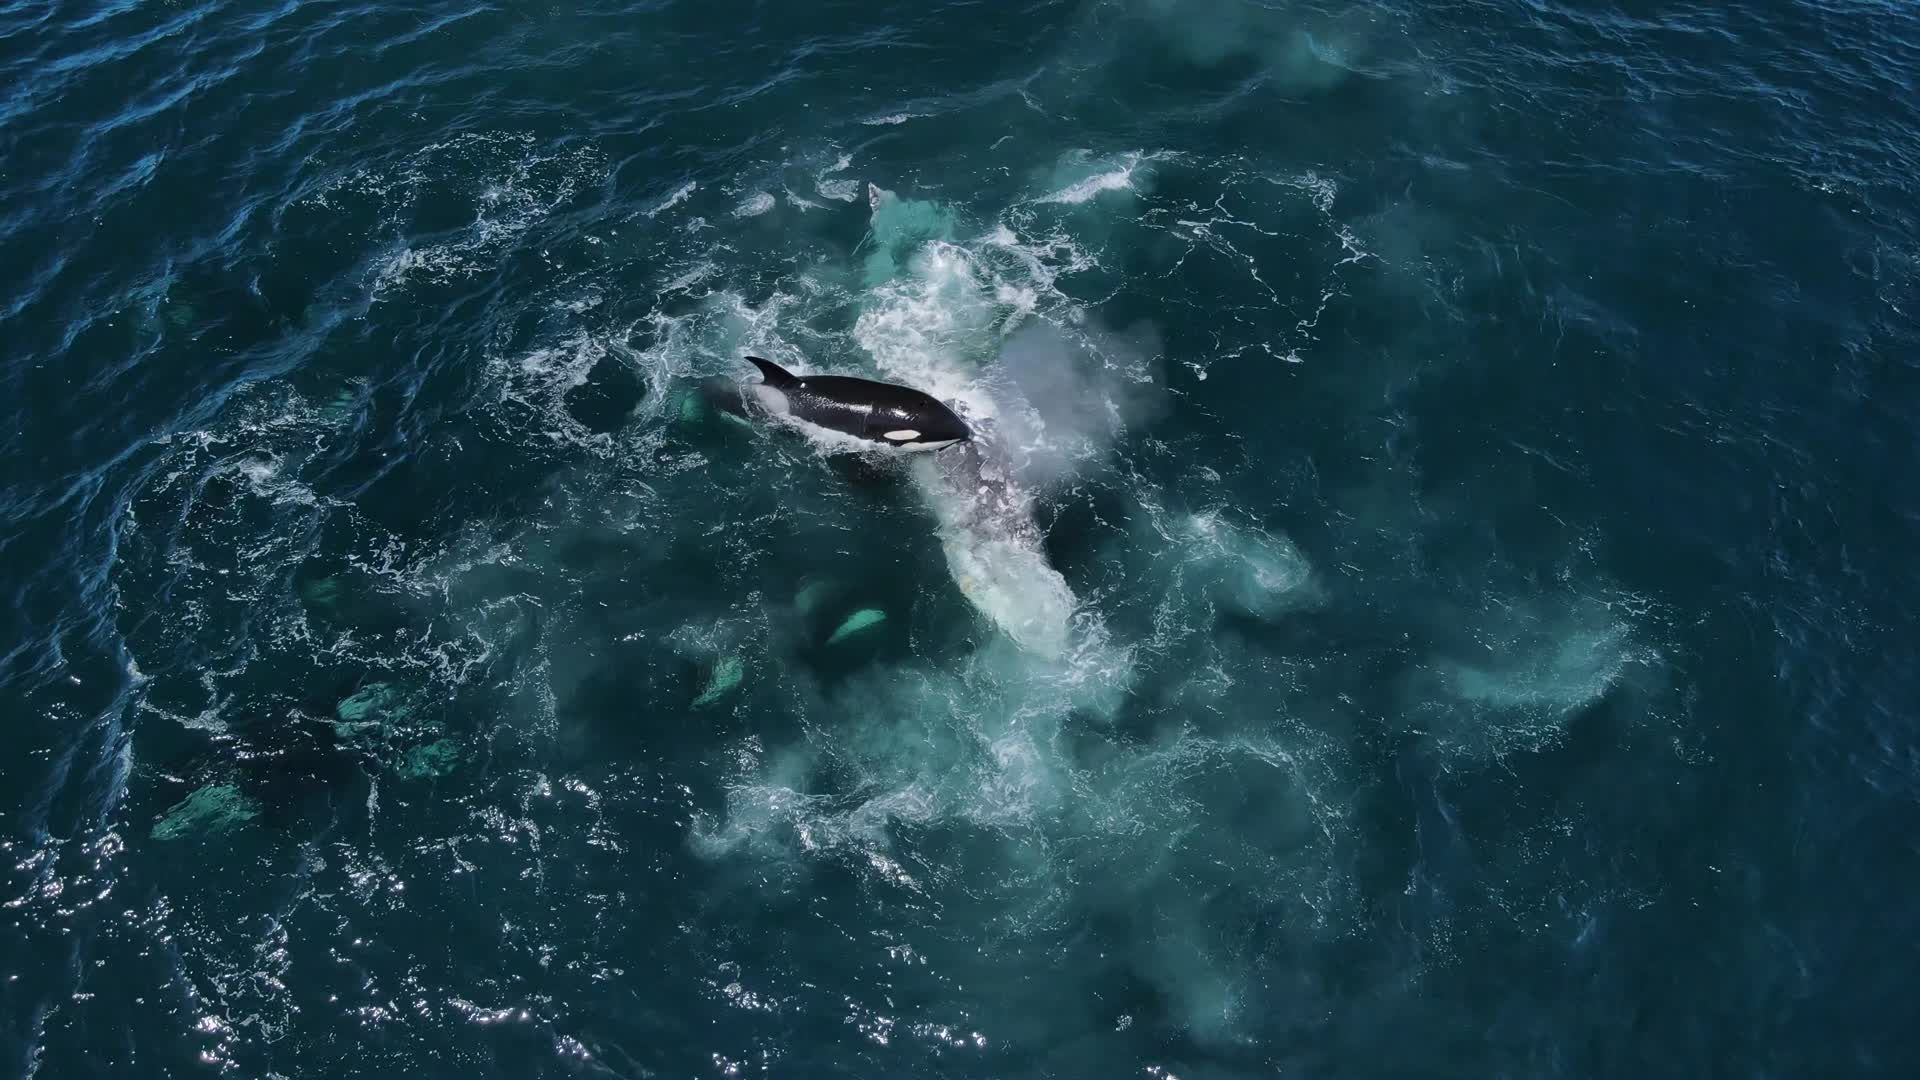 Killer whales attack gray whale in the Monterey Bay